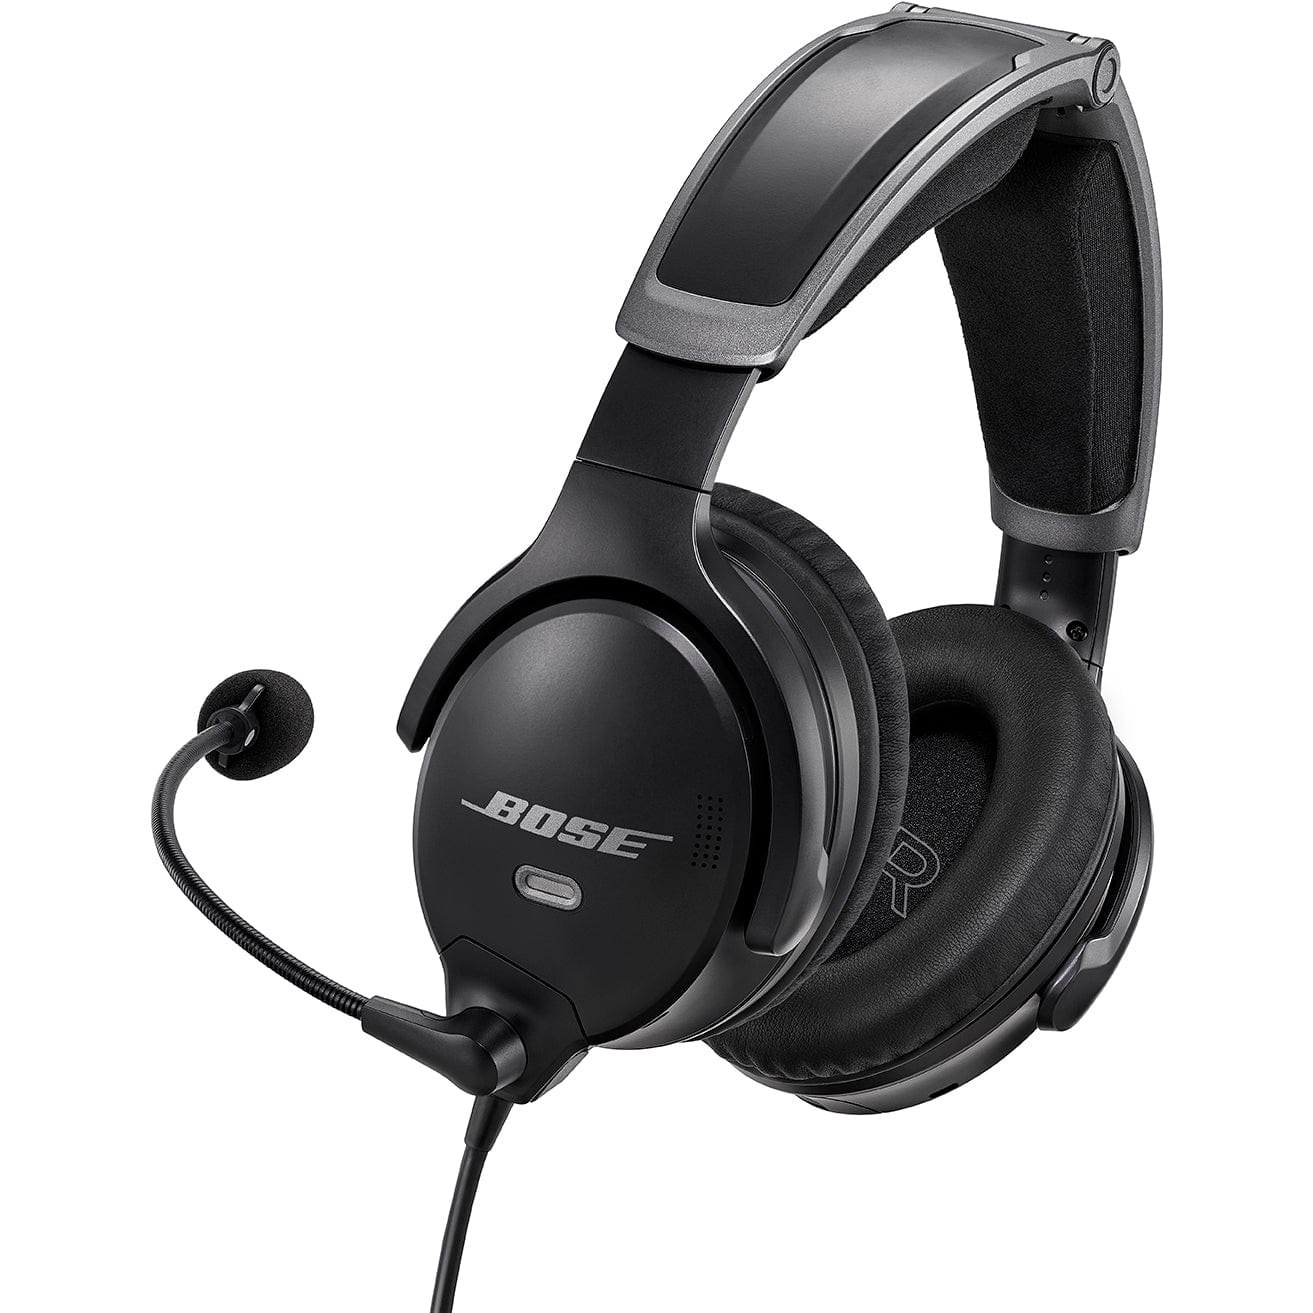 Bose A30 Aviation Headset U174 Helicopter Battery Power with Bluetooth - PilotMall.com